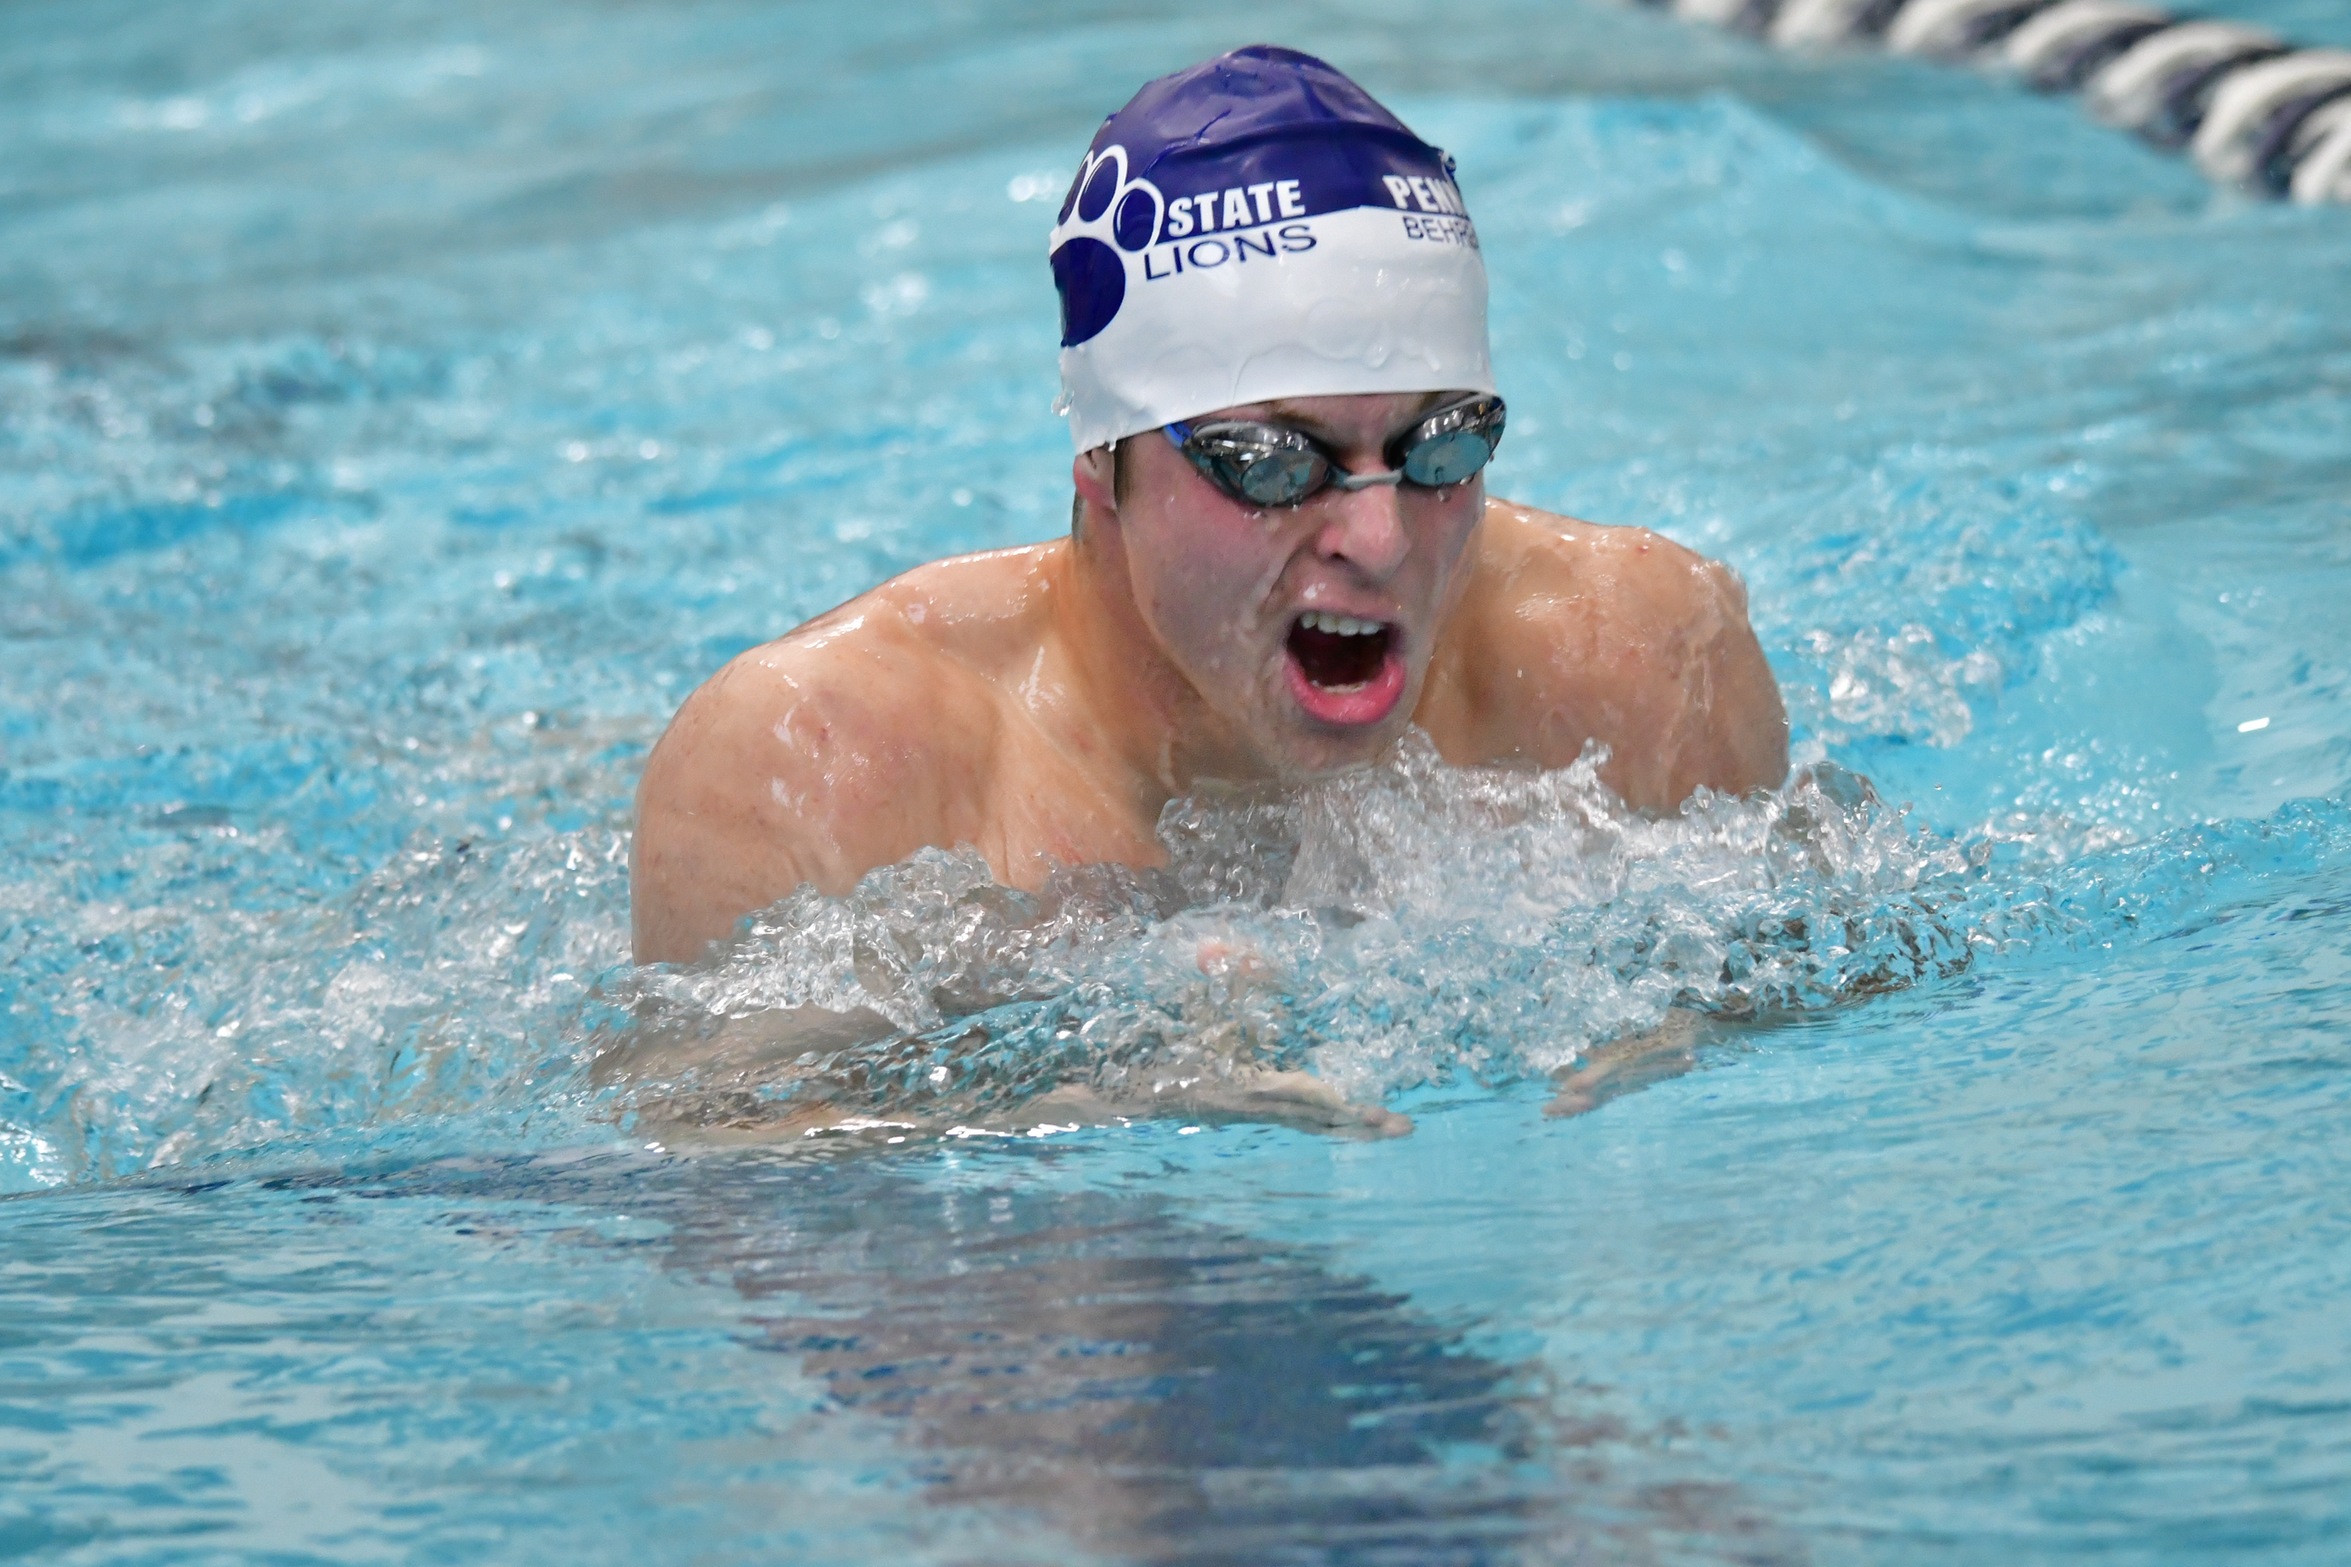 Tumino Resets Team Record; Lions in Second Place at Allegheny Empire Championships